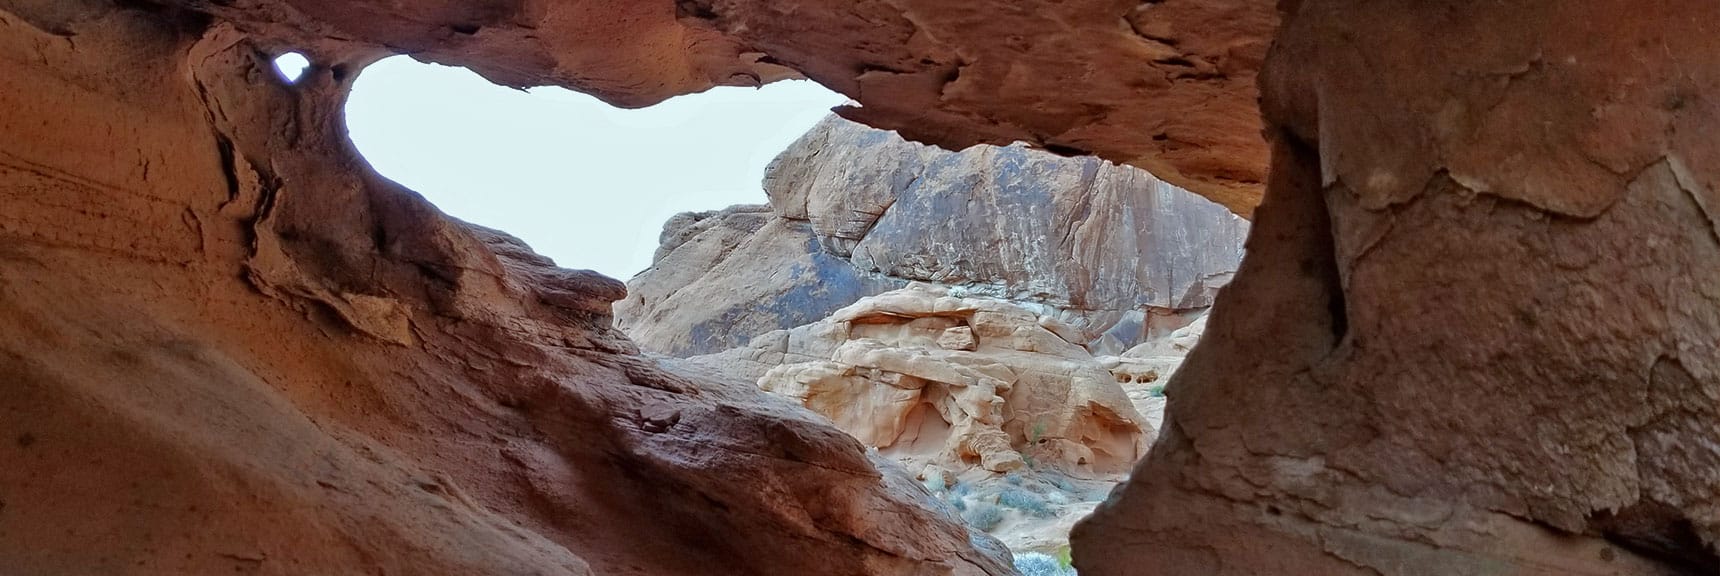 View from Inside the Rock Frames Fire Canyon in Valley of Fire State Park, Nevada